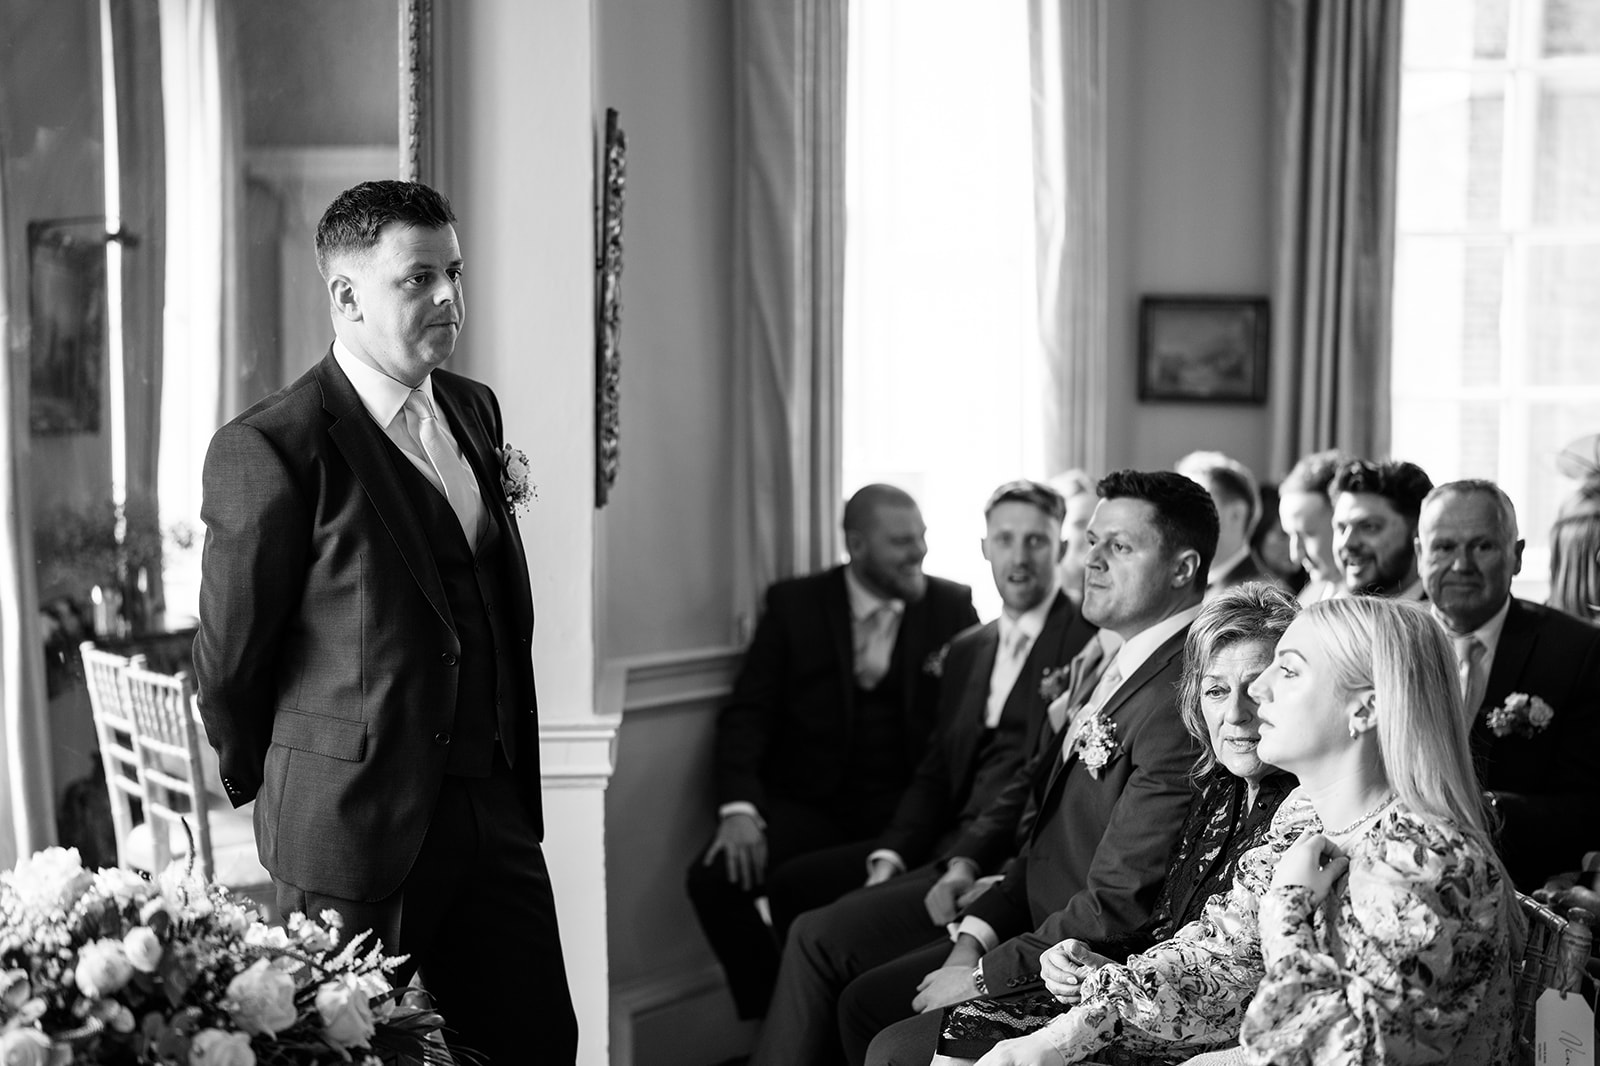 The groom looking nervous in the ceremony room at Norwood Park